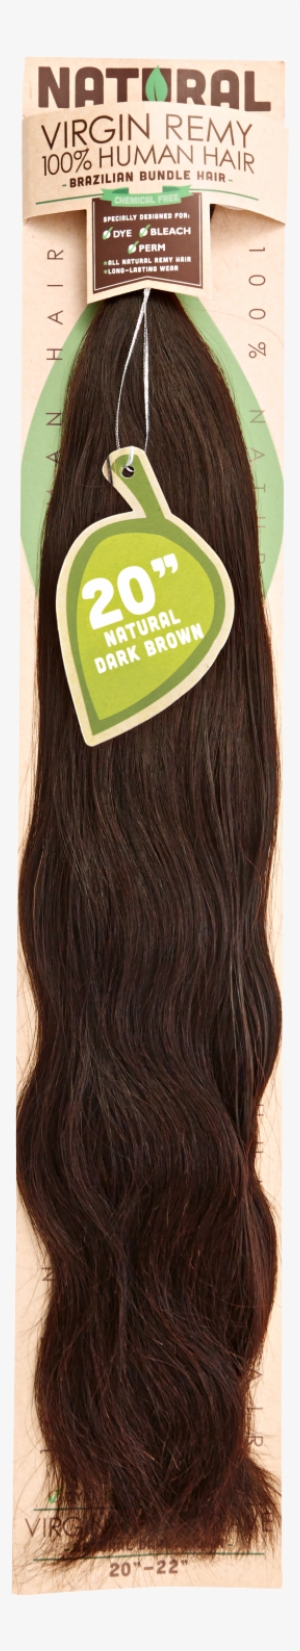 Brown Hair Png Download Transparent Brown Hair Png Images For Free Page 5 Nicepng - roblox guest noob and bacon hair hd png download transparent png image pngitem